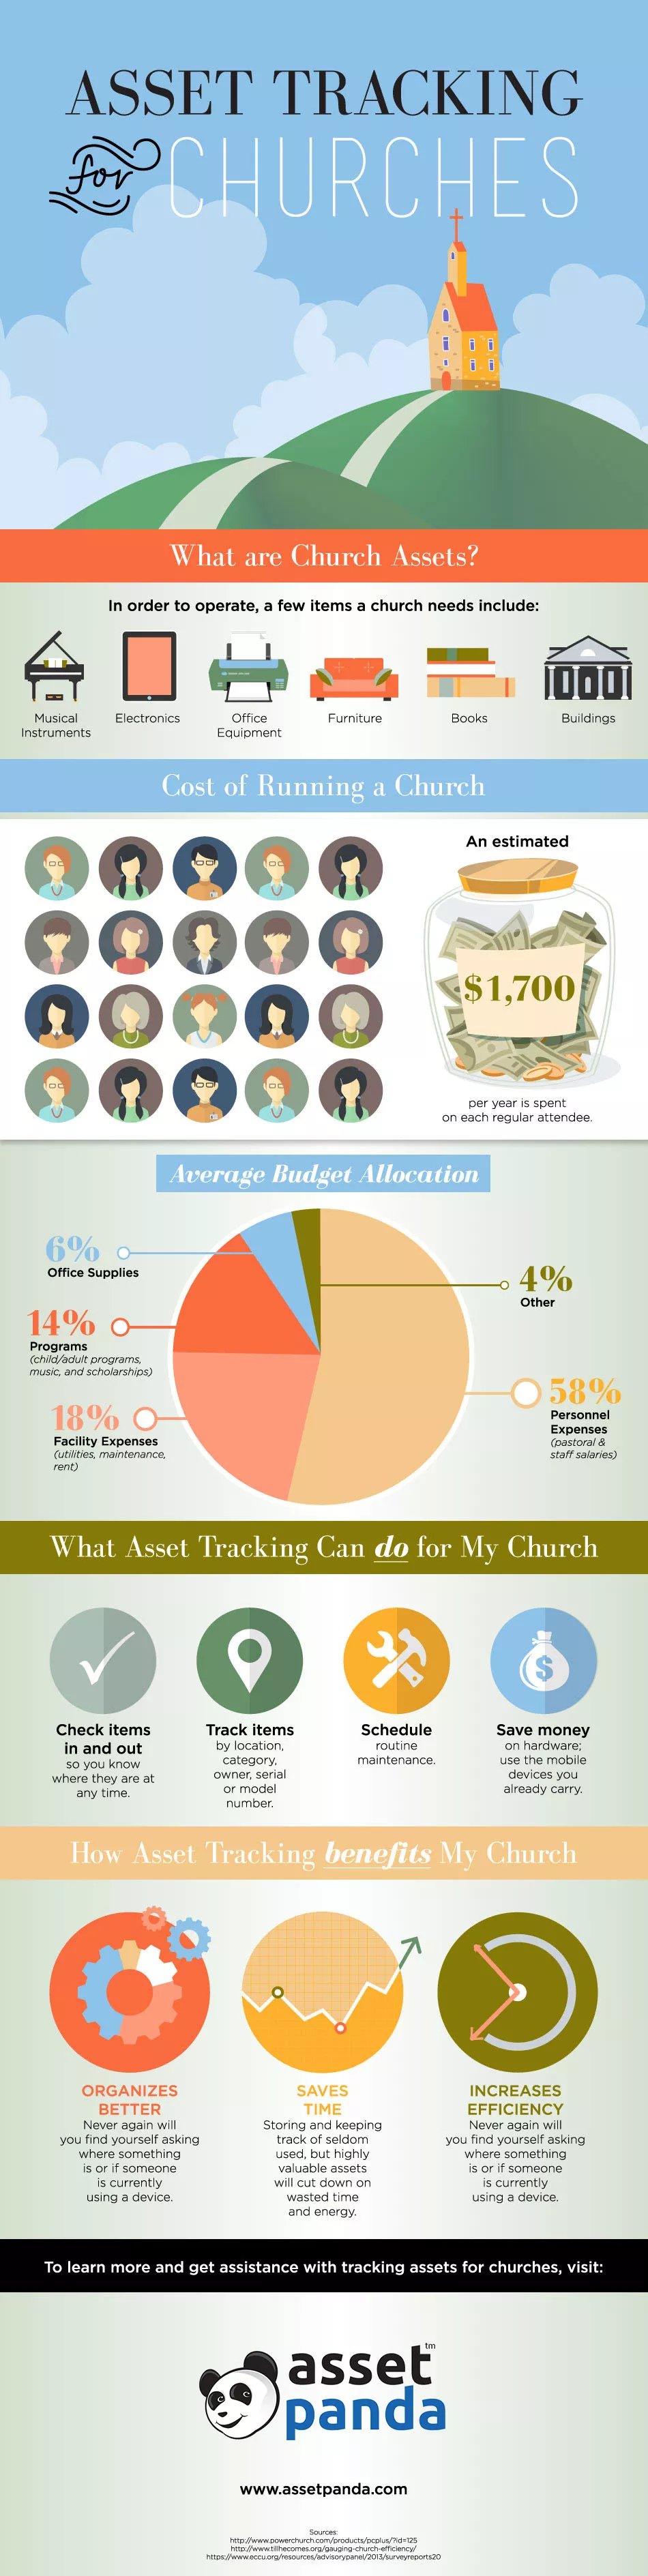 asset-tracking-churches (1)